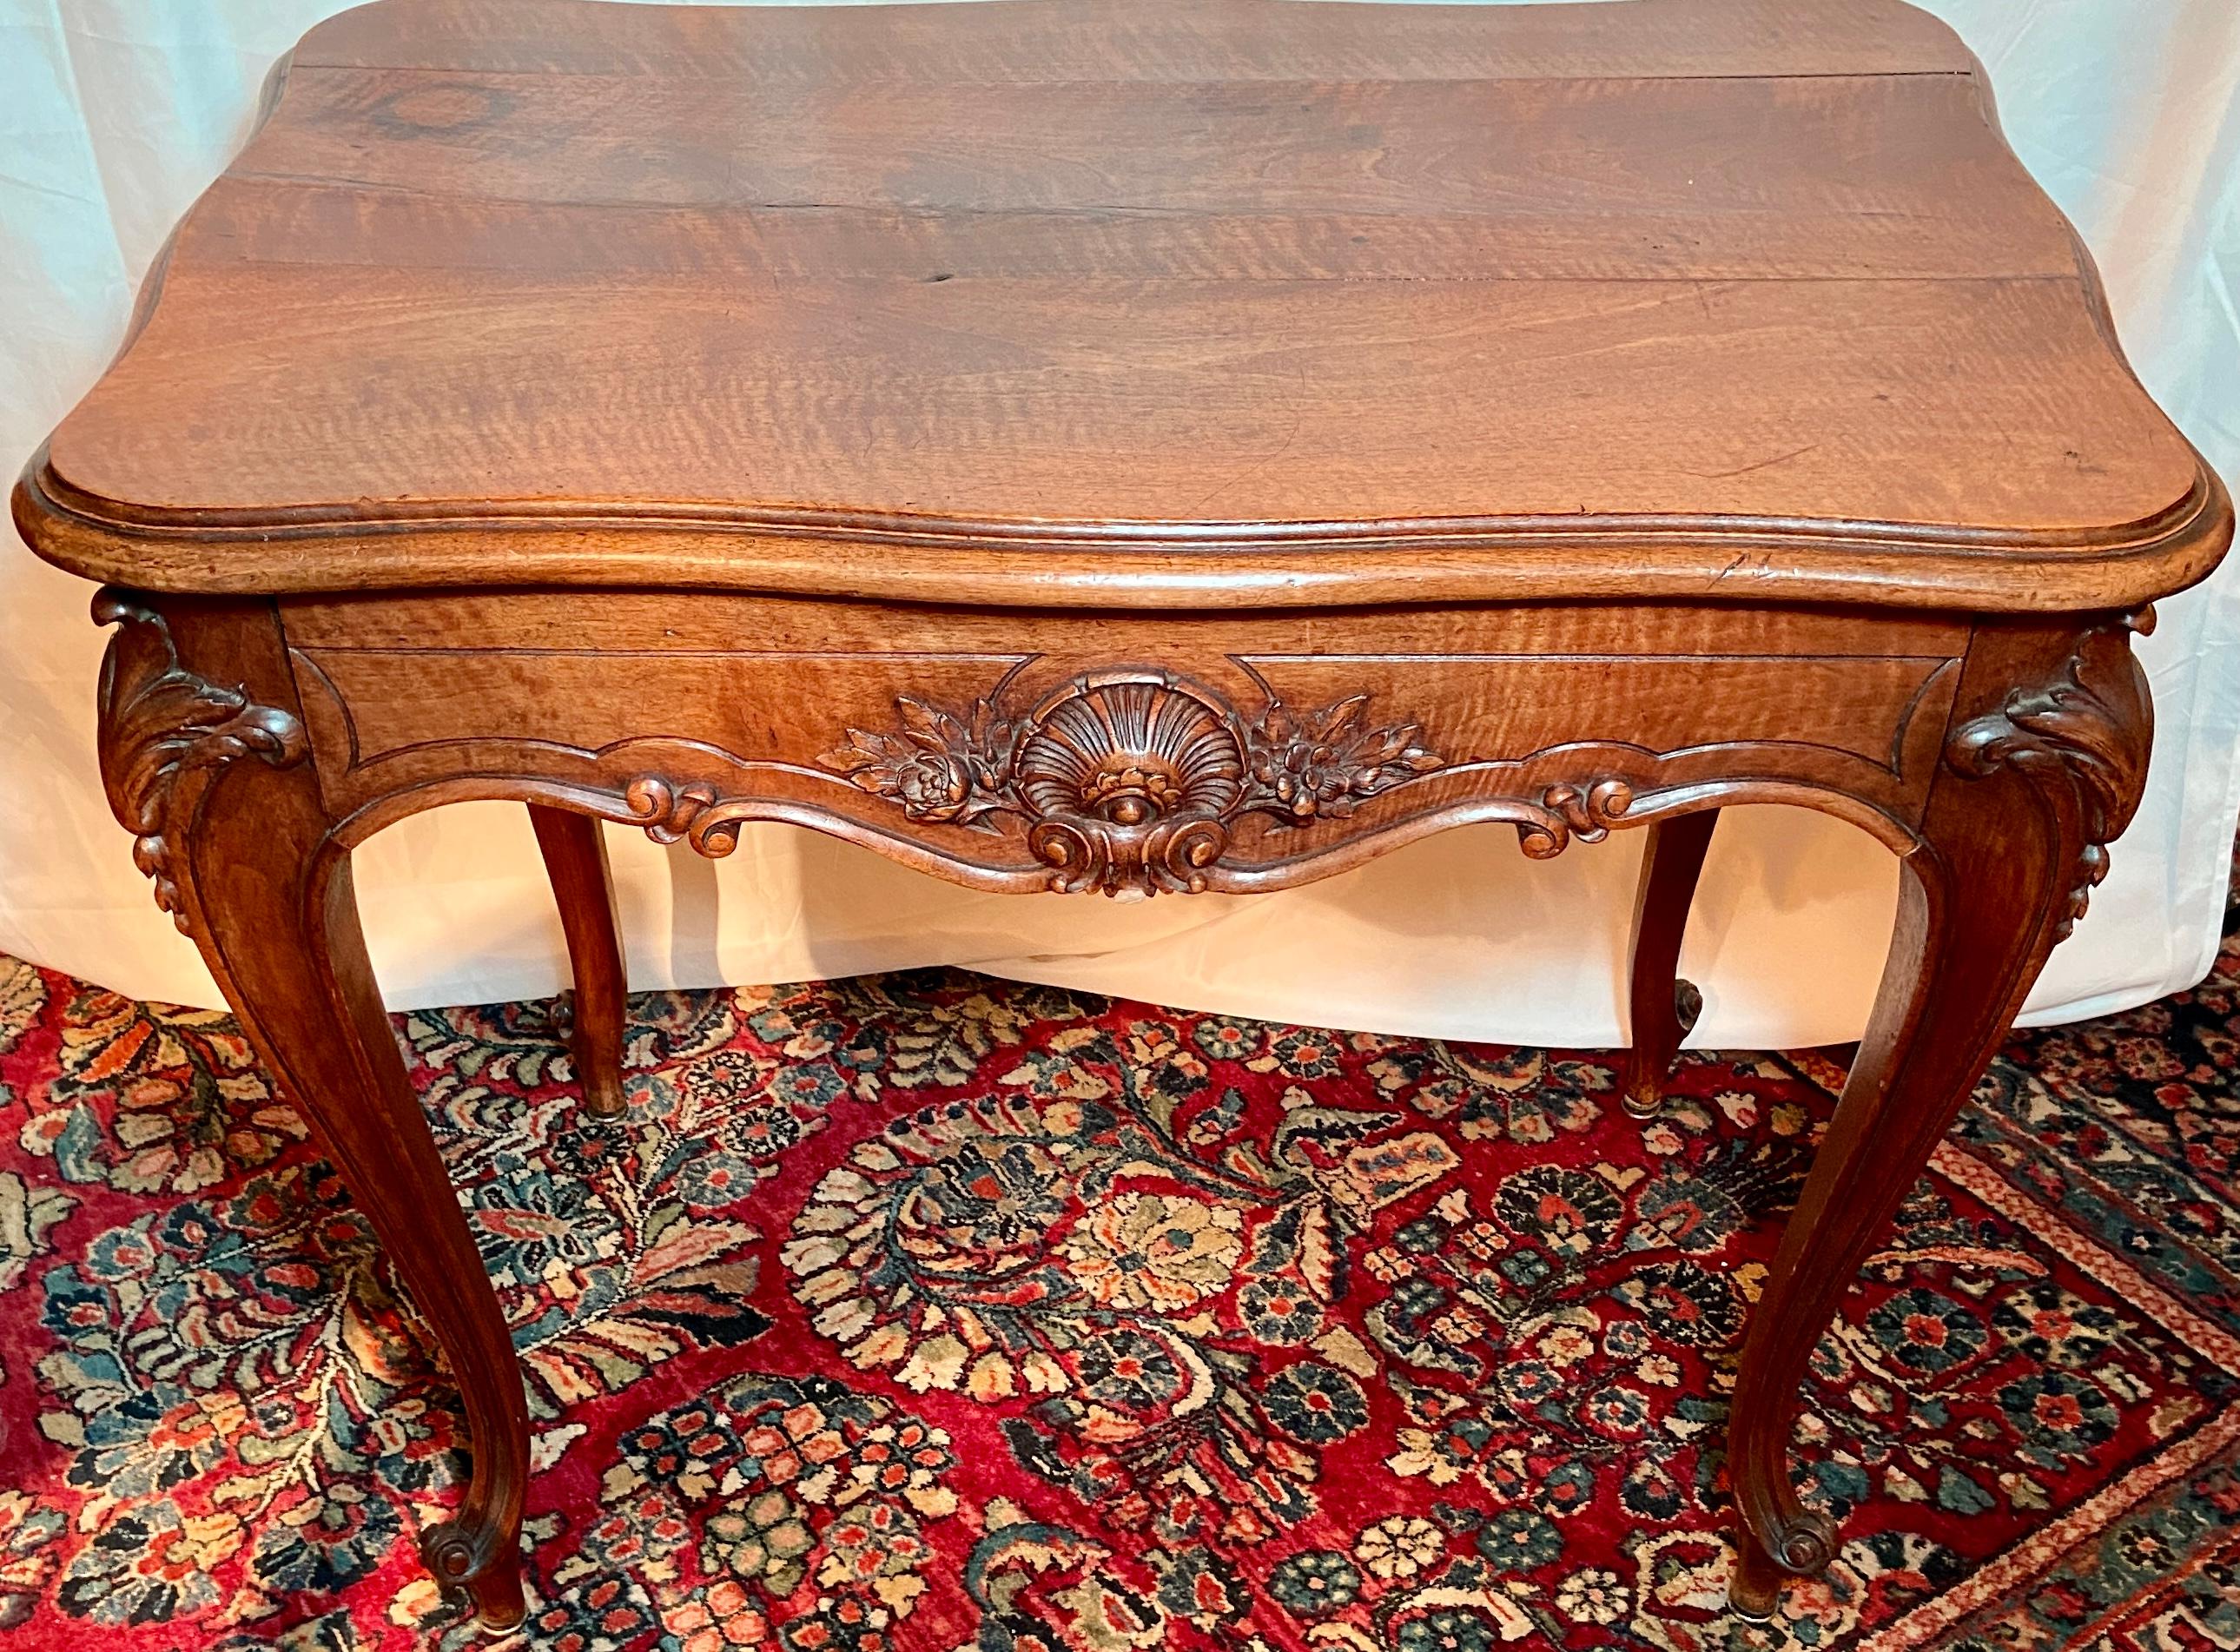 Antique French carved walnut occasional table, circa 1860.